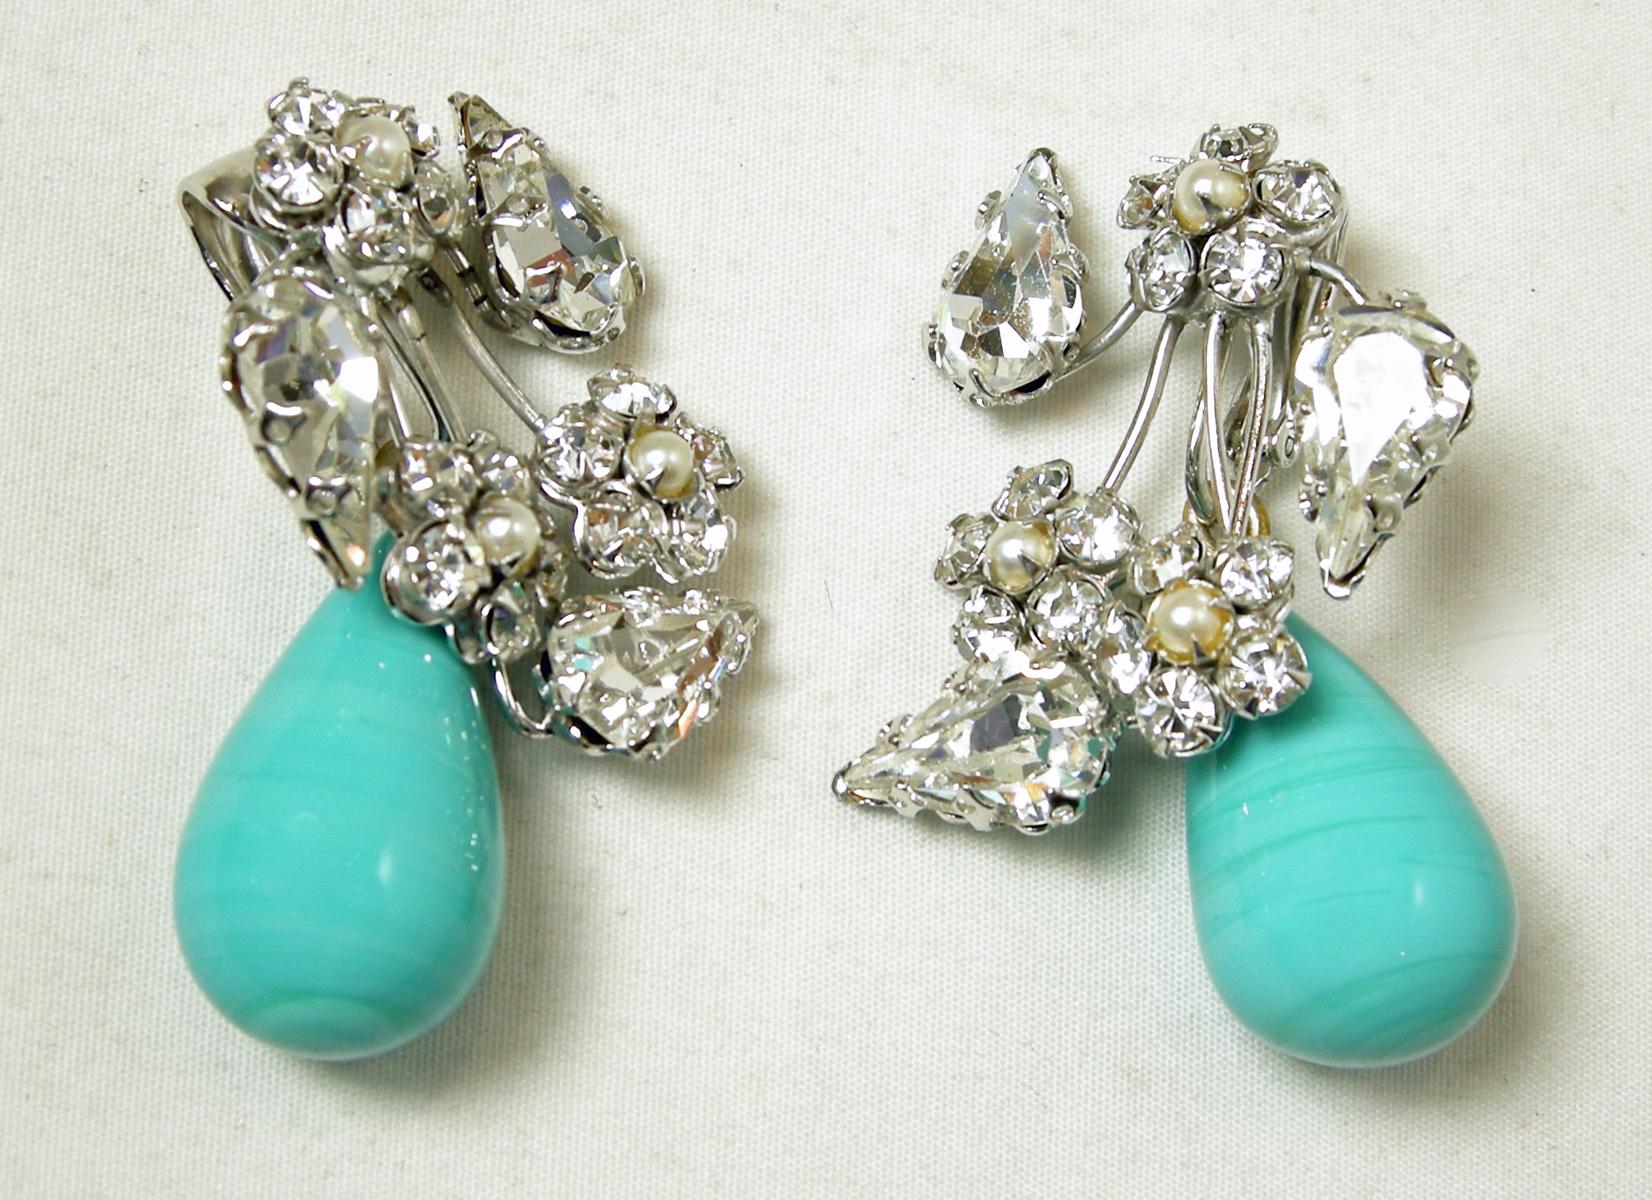 These stunning earrings have faux marbleized turquoise tear shaped drops. The top has clear crystals accentuated with faux pearls in a silver tone setting.  In excellent condition, these clip earrings measure 1-7/8” x 1-1/8”.